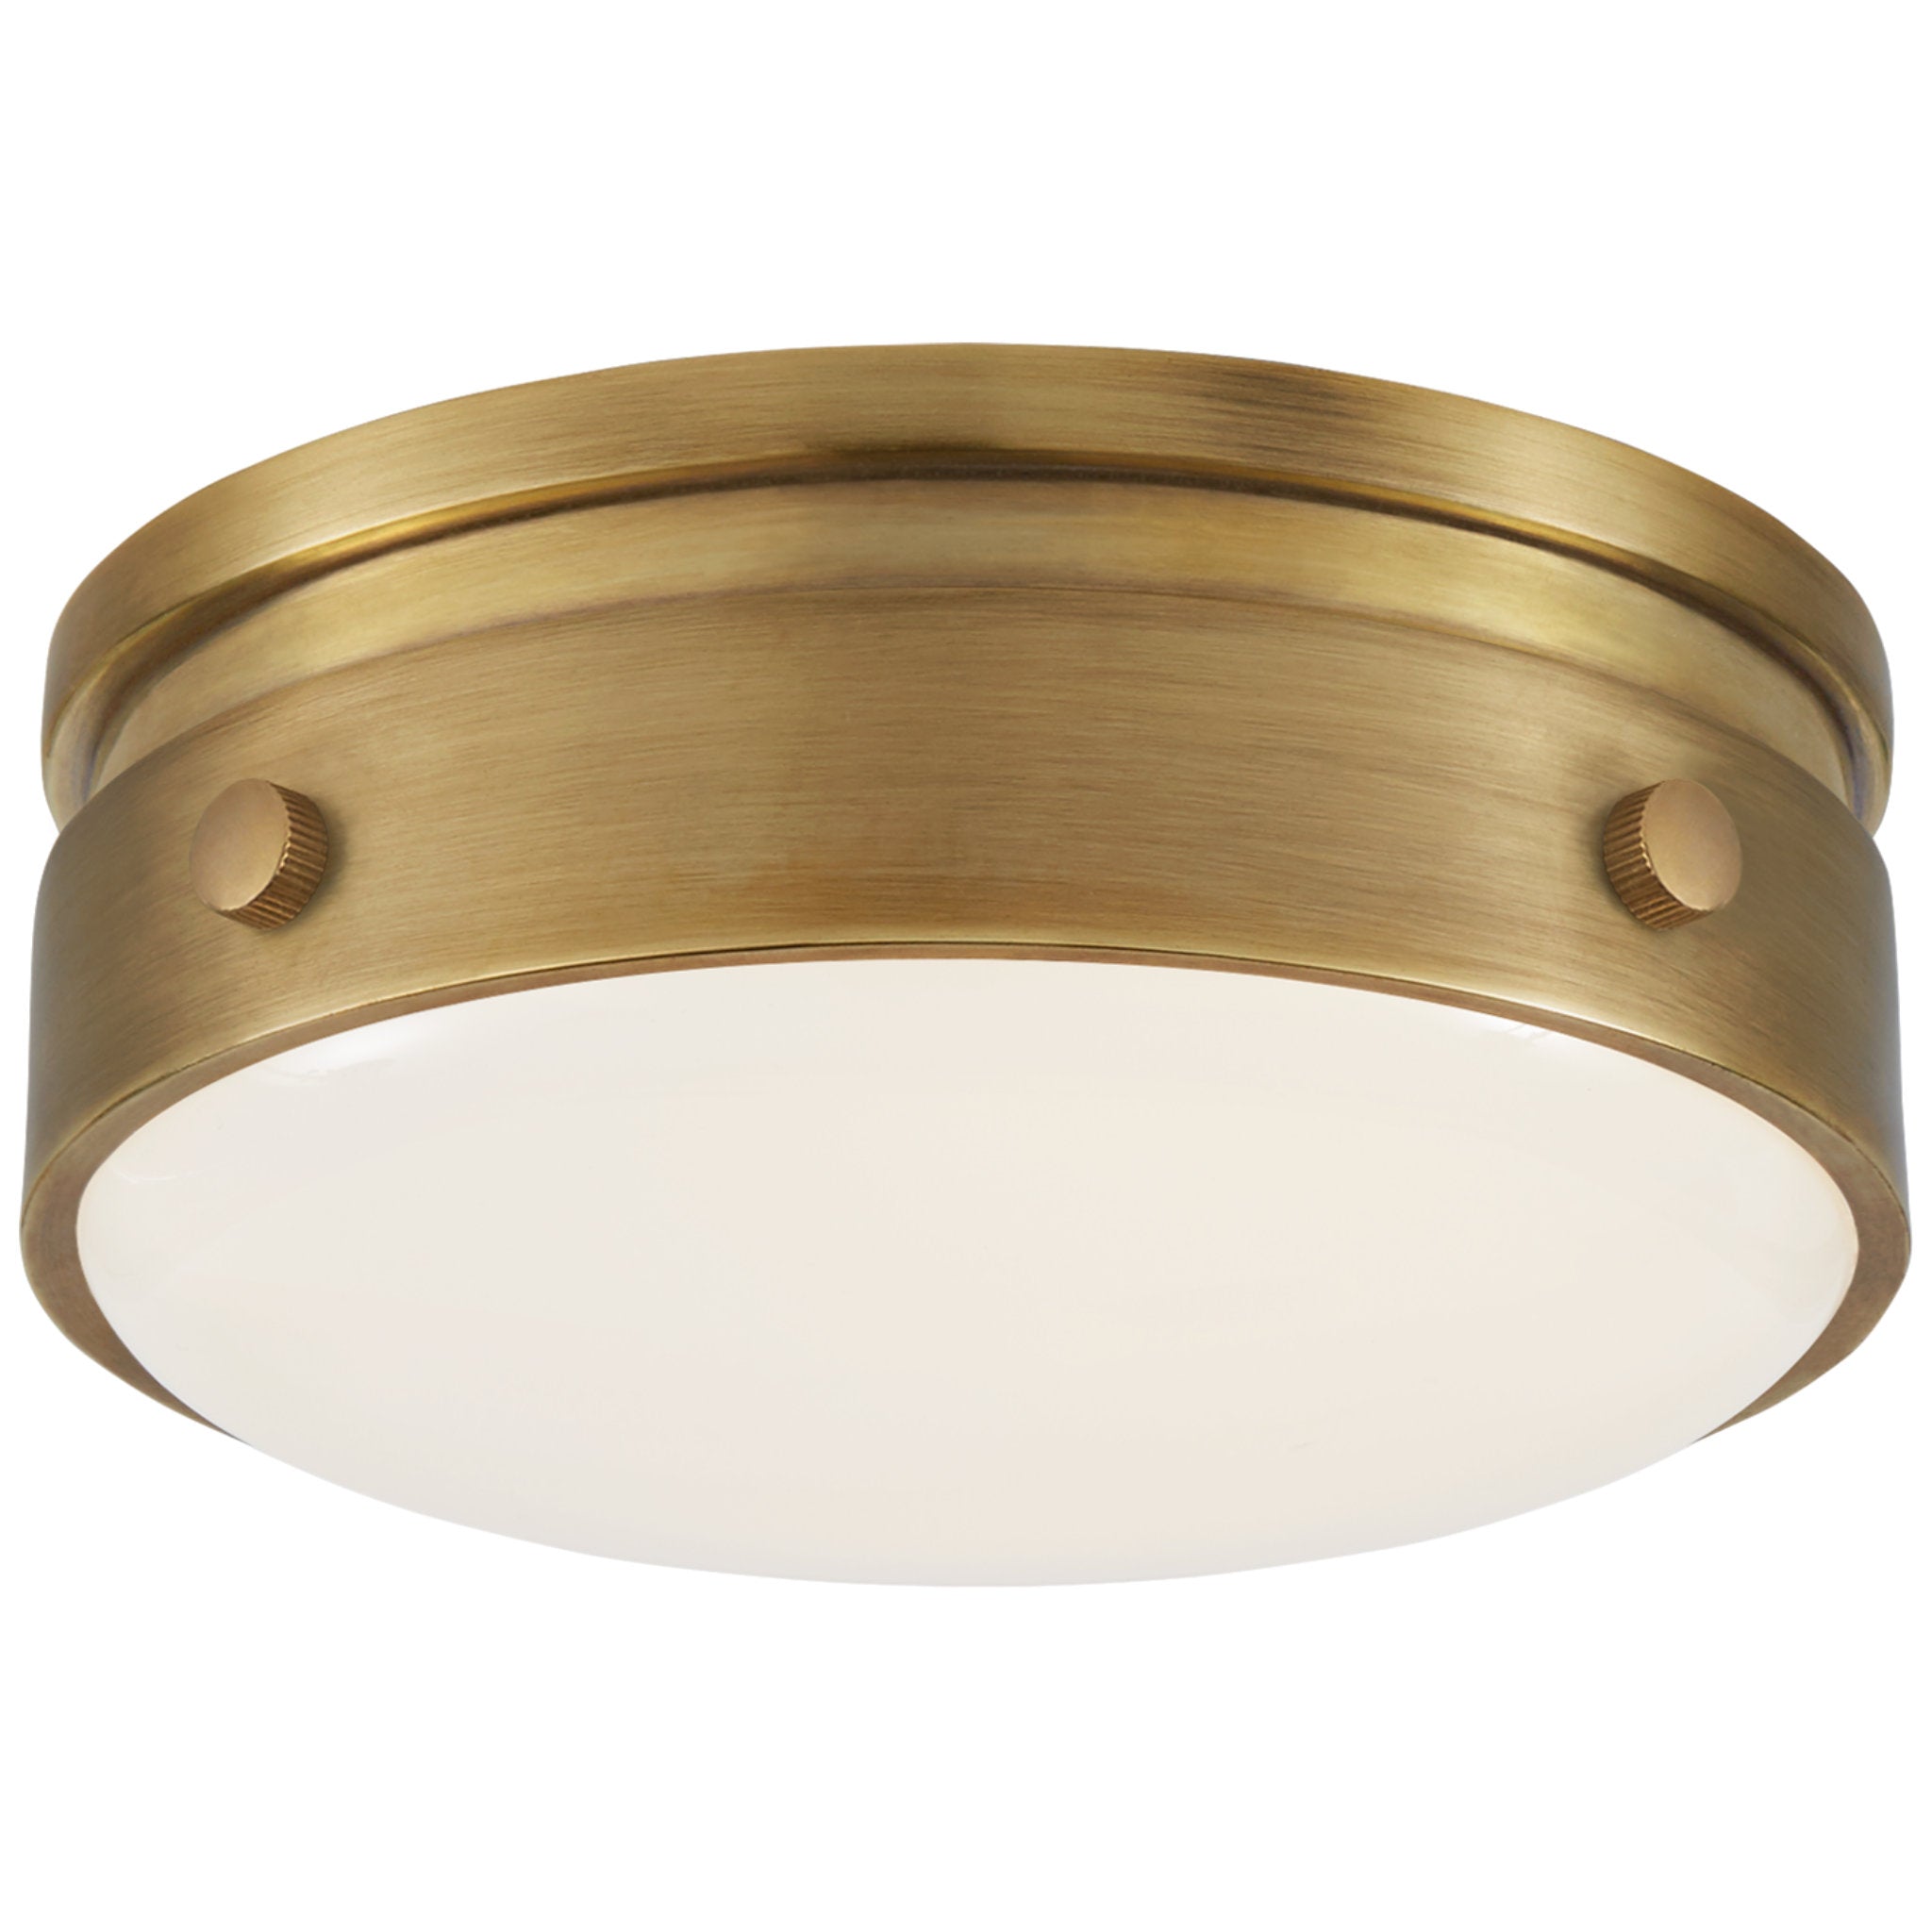 Thomas O'Brien Hicks 5.5" Solitaire Flush Mount in Hand-Rubbed Antique Brass with White Glass